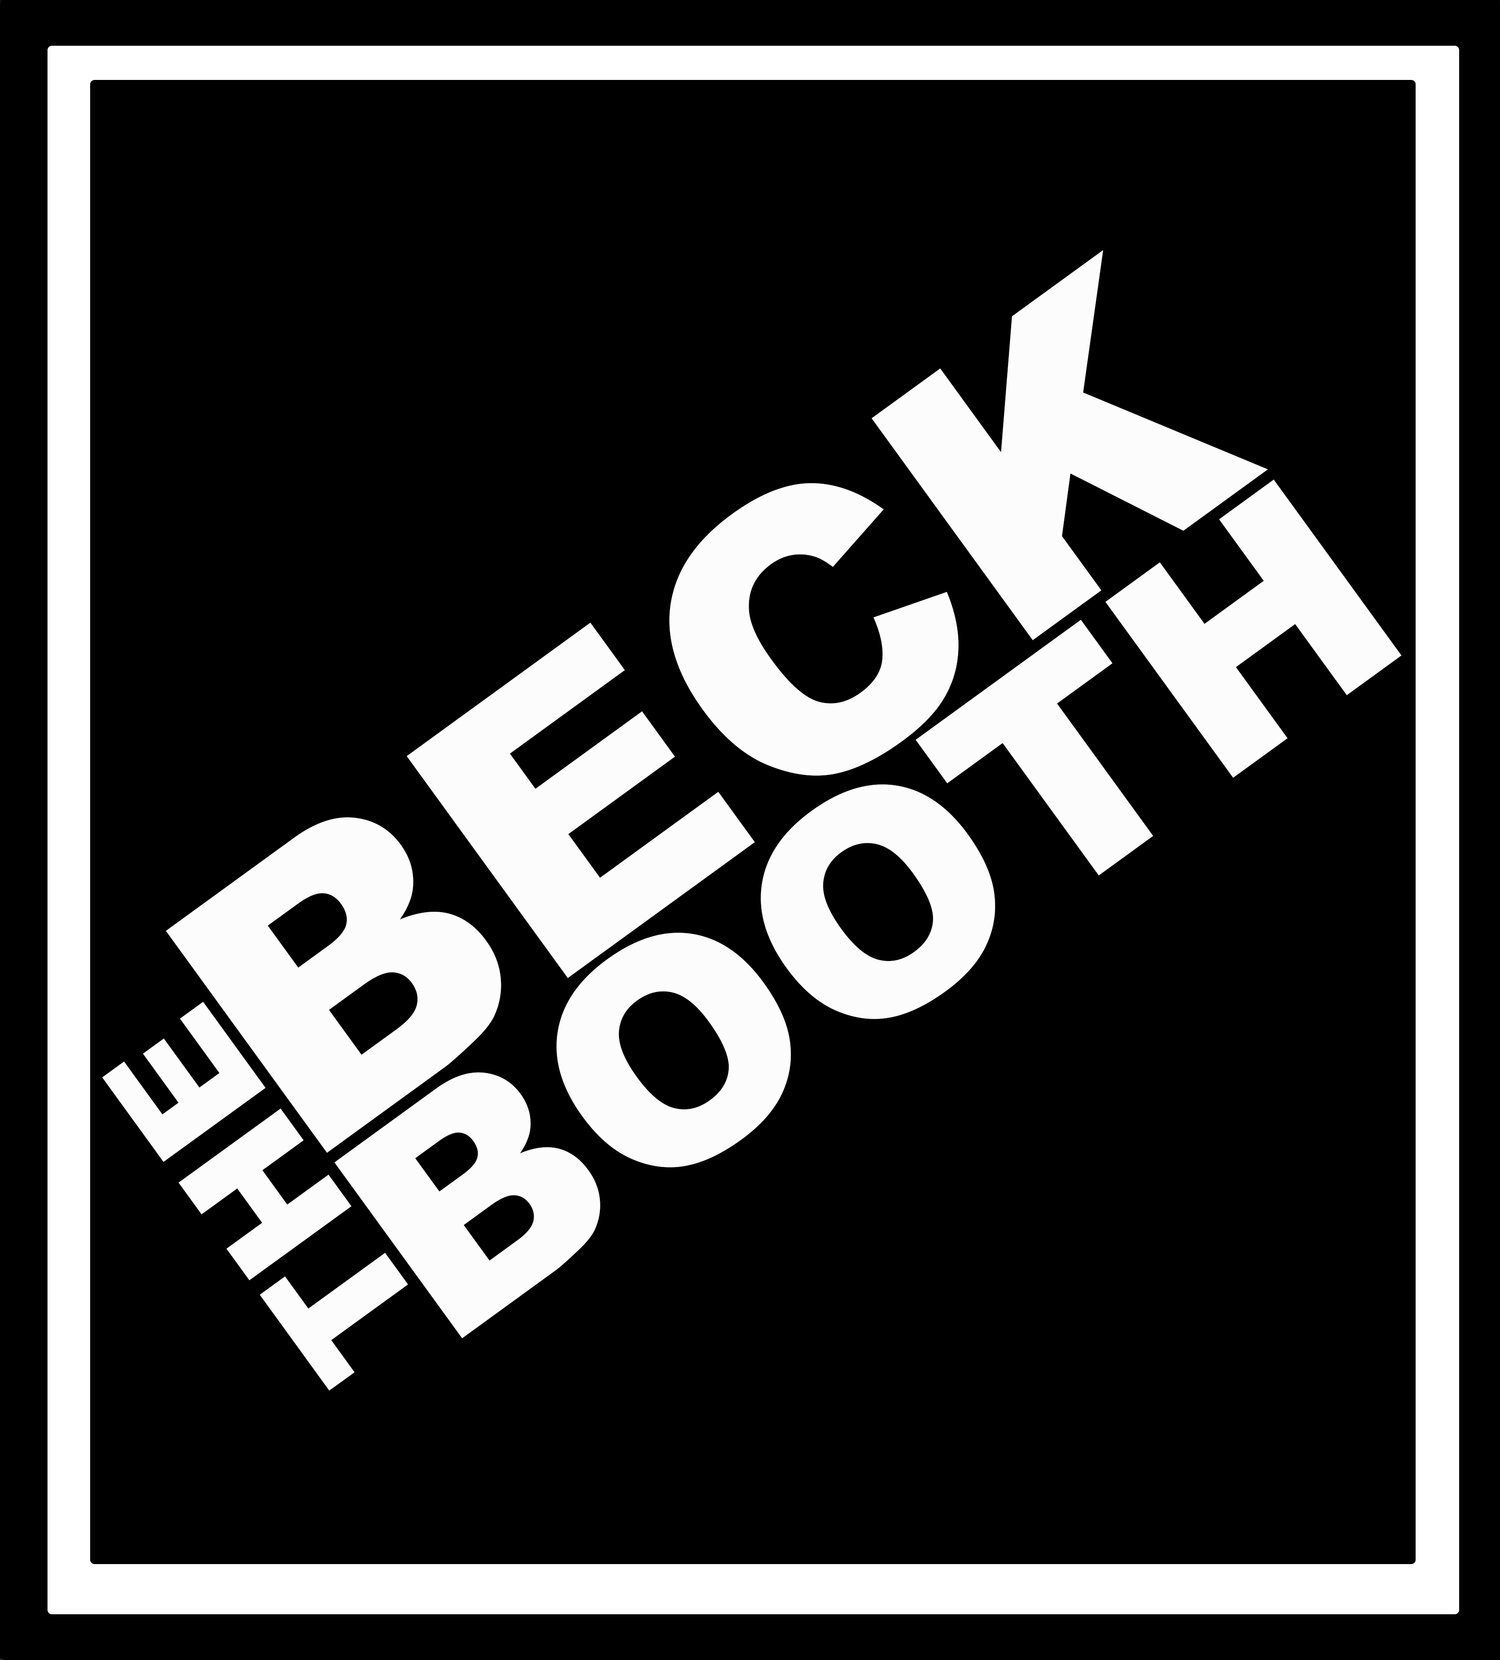 The Beck Booth